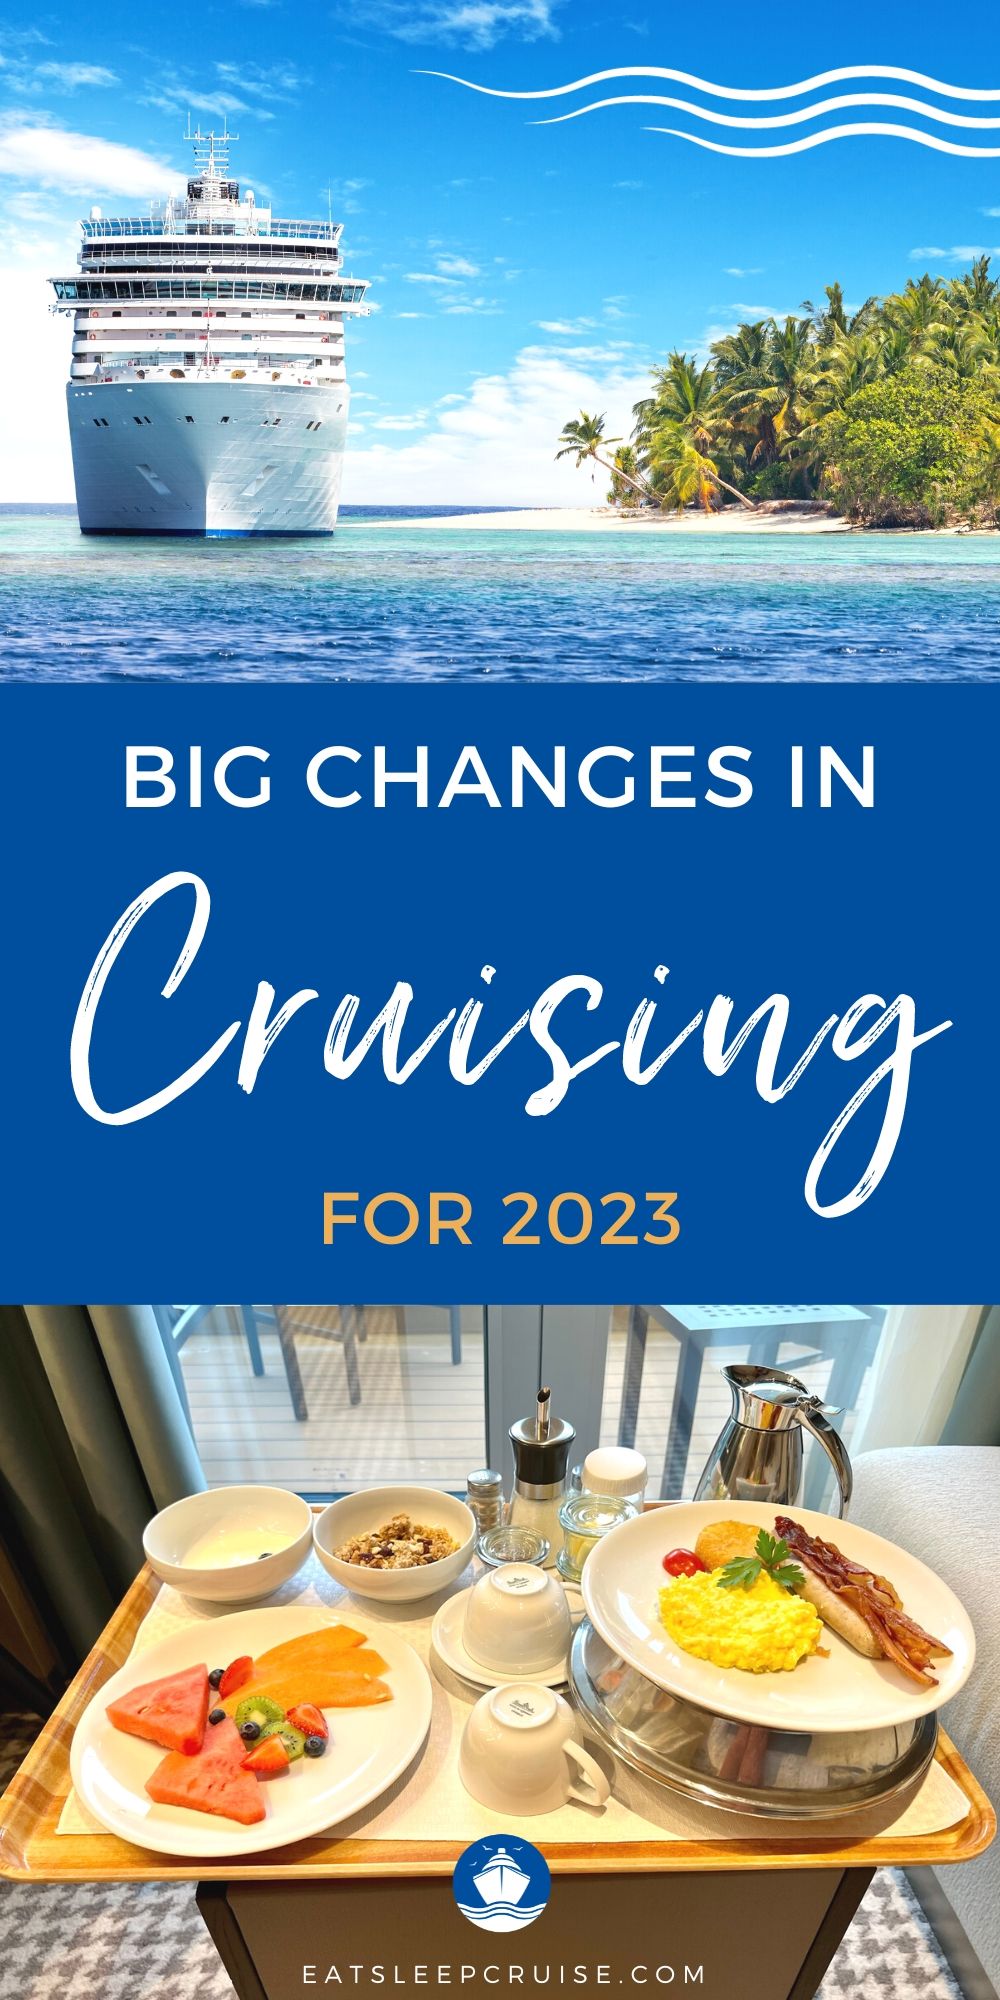 8 Big Changes to Cruising in 2023